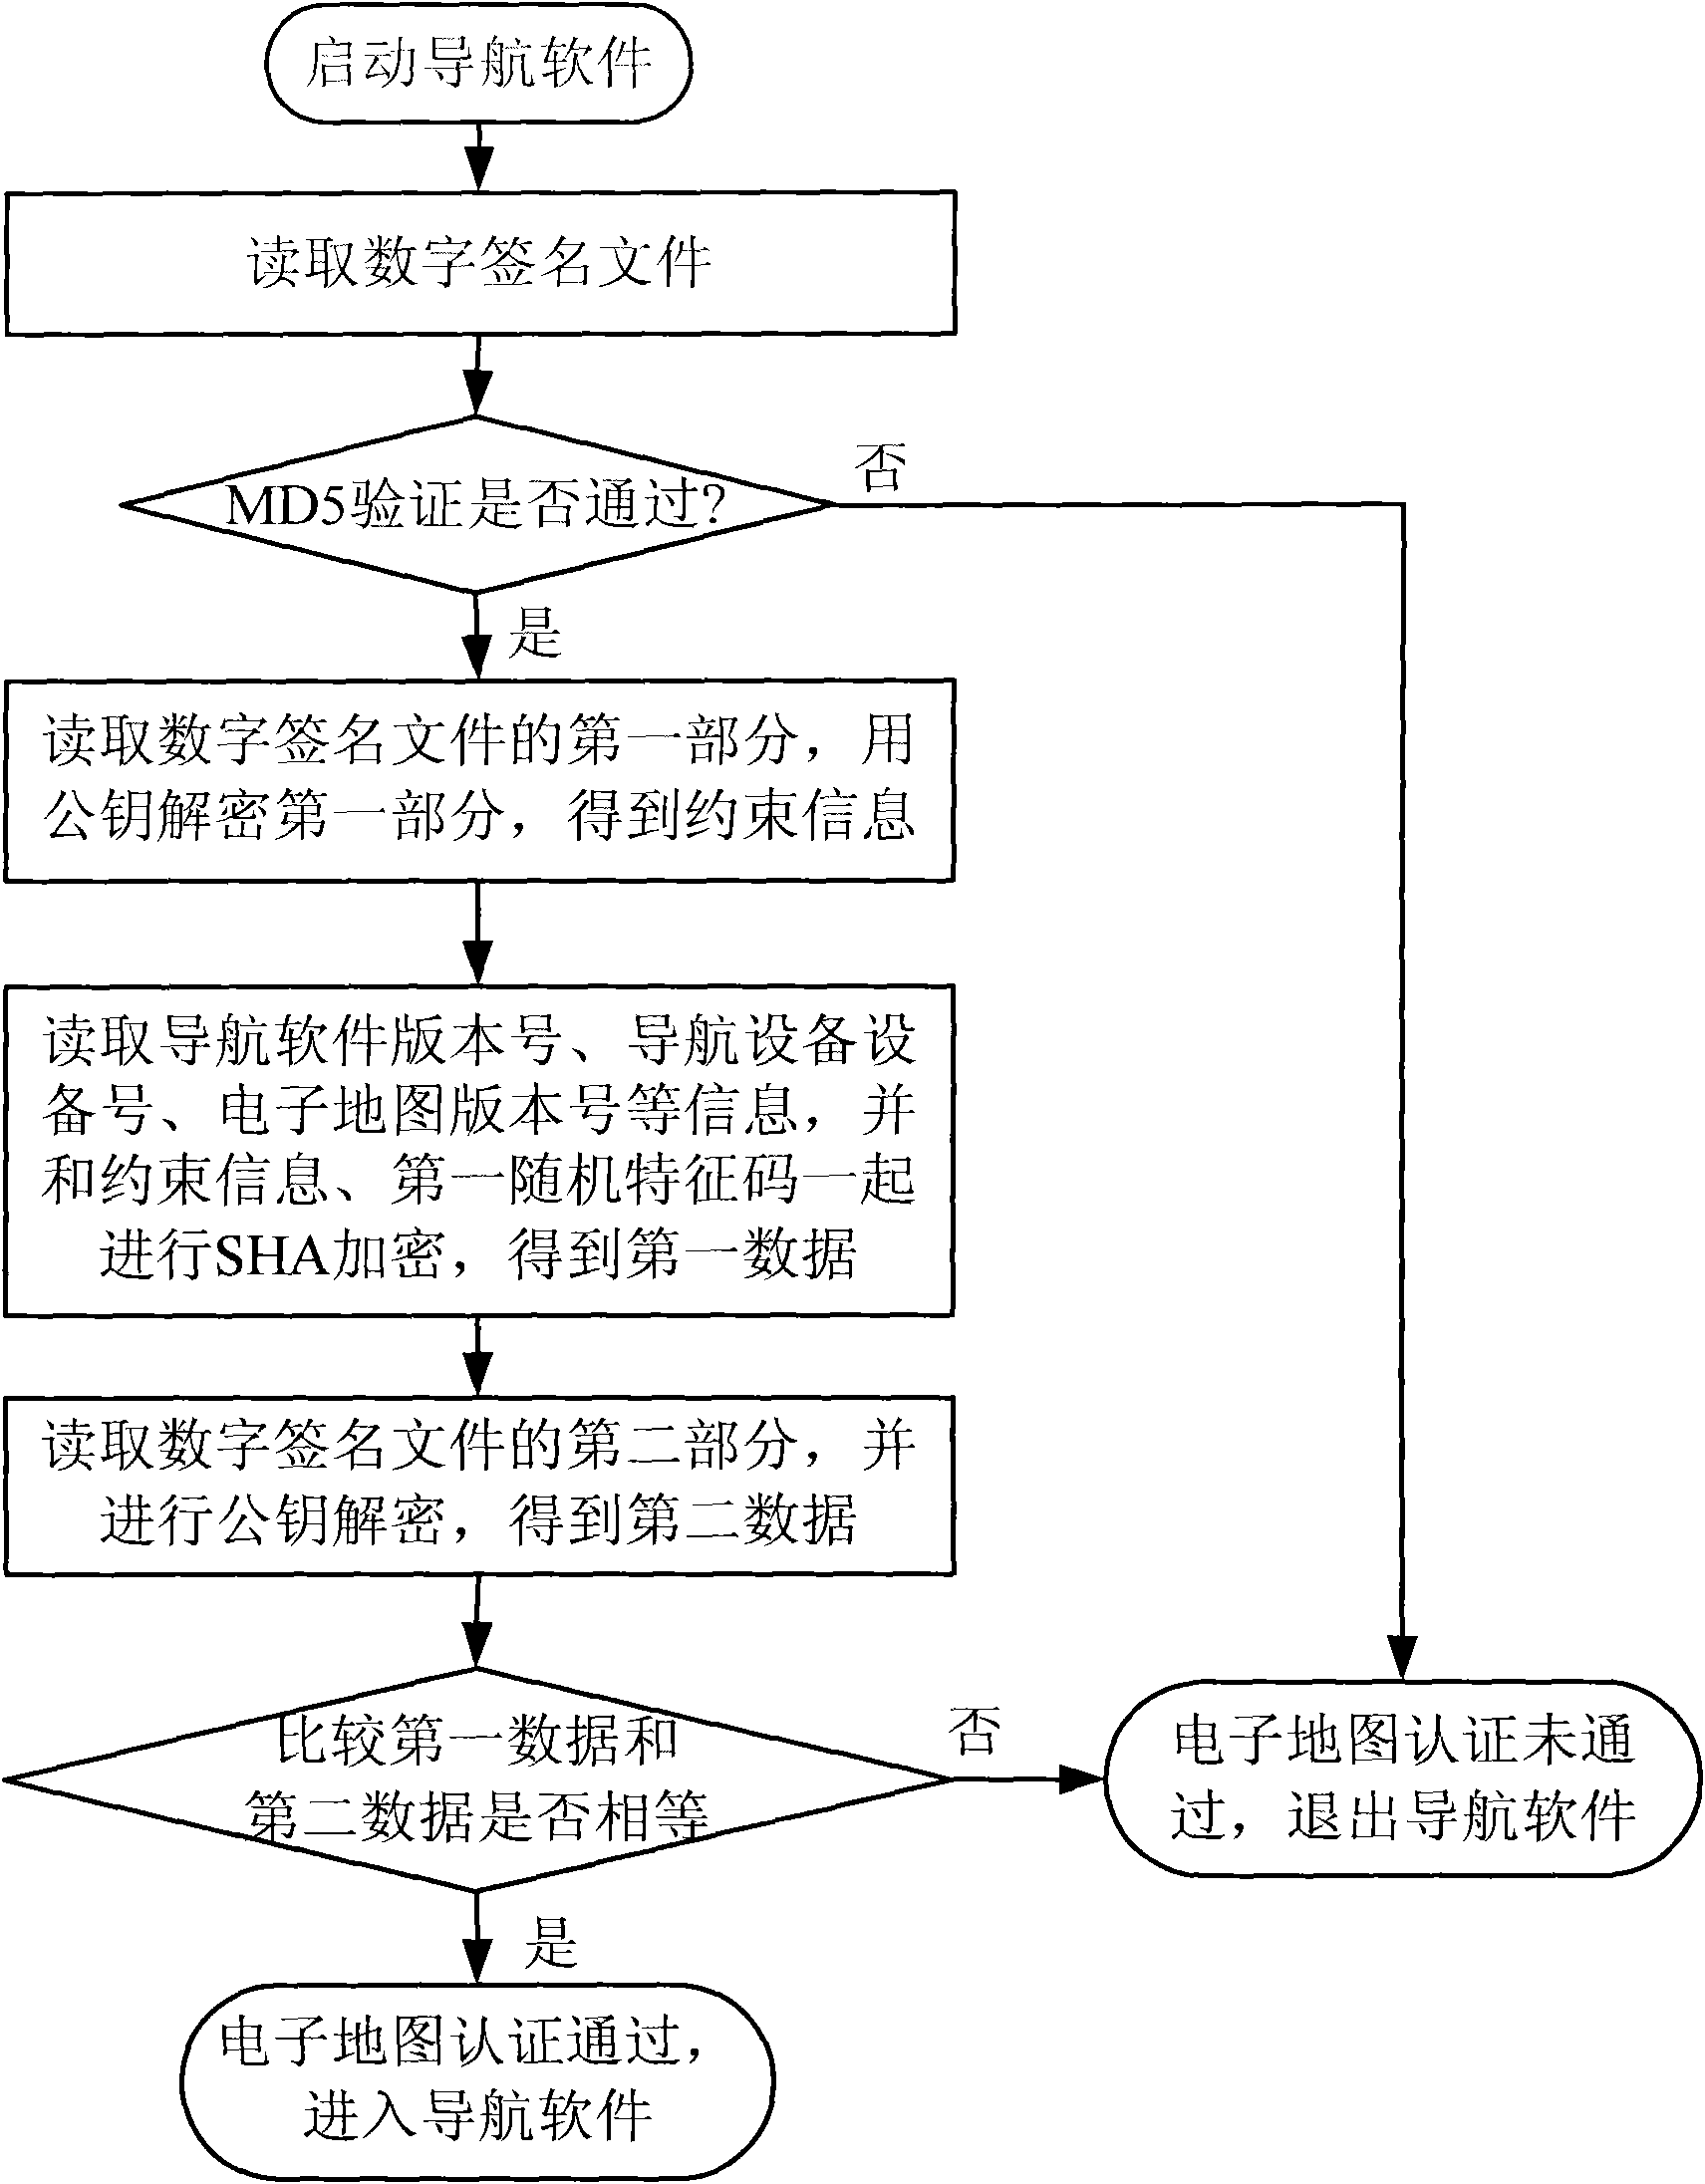 Method for restricting encrypted certificated electronic map with variable information